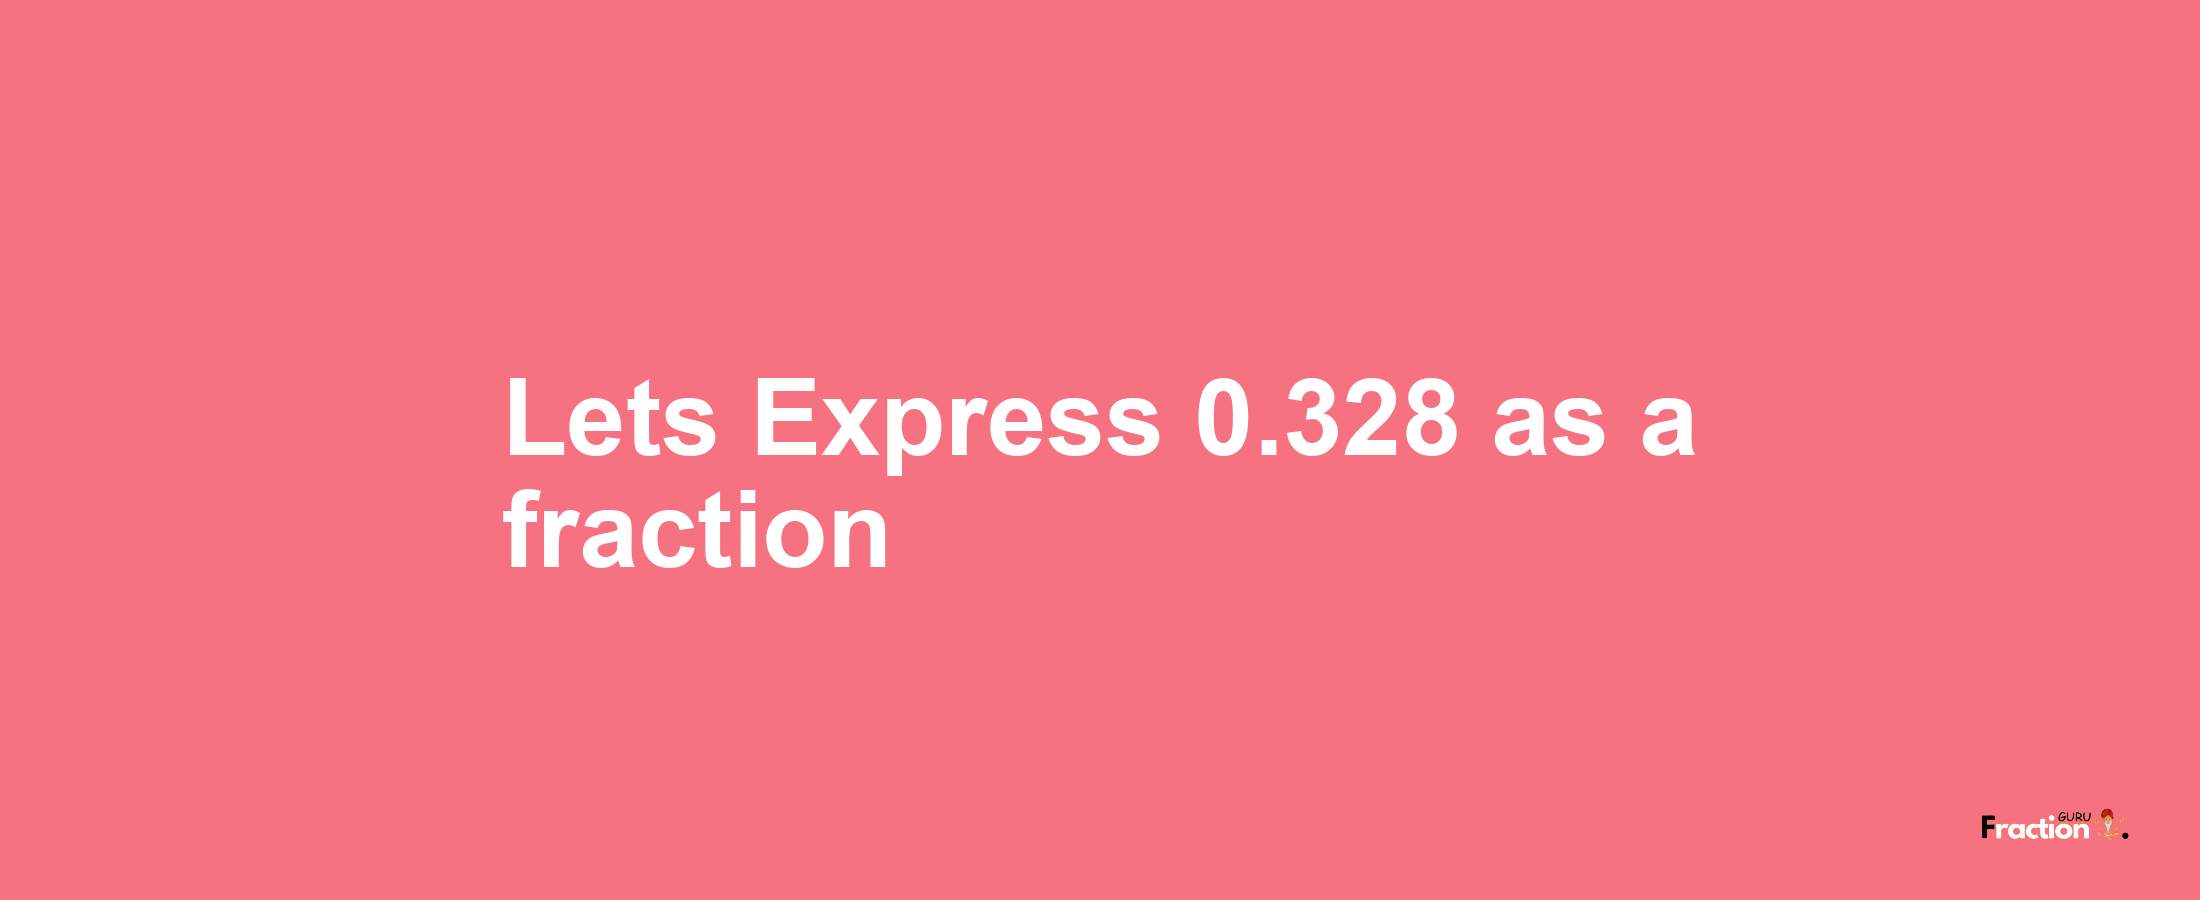 Lets Express 0.328 as afraction